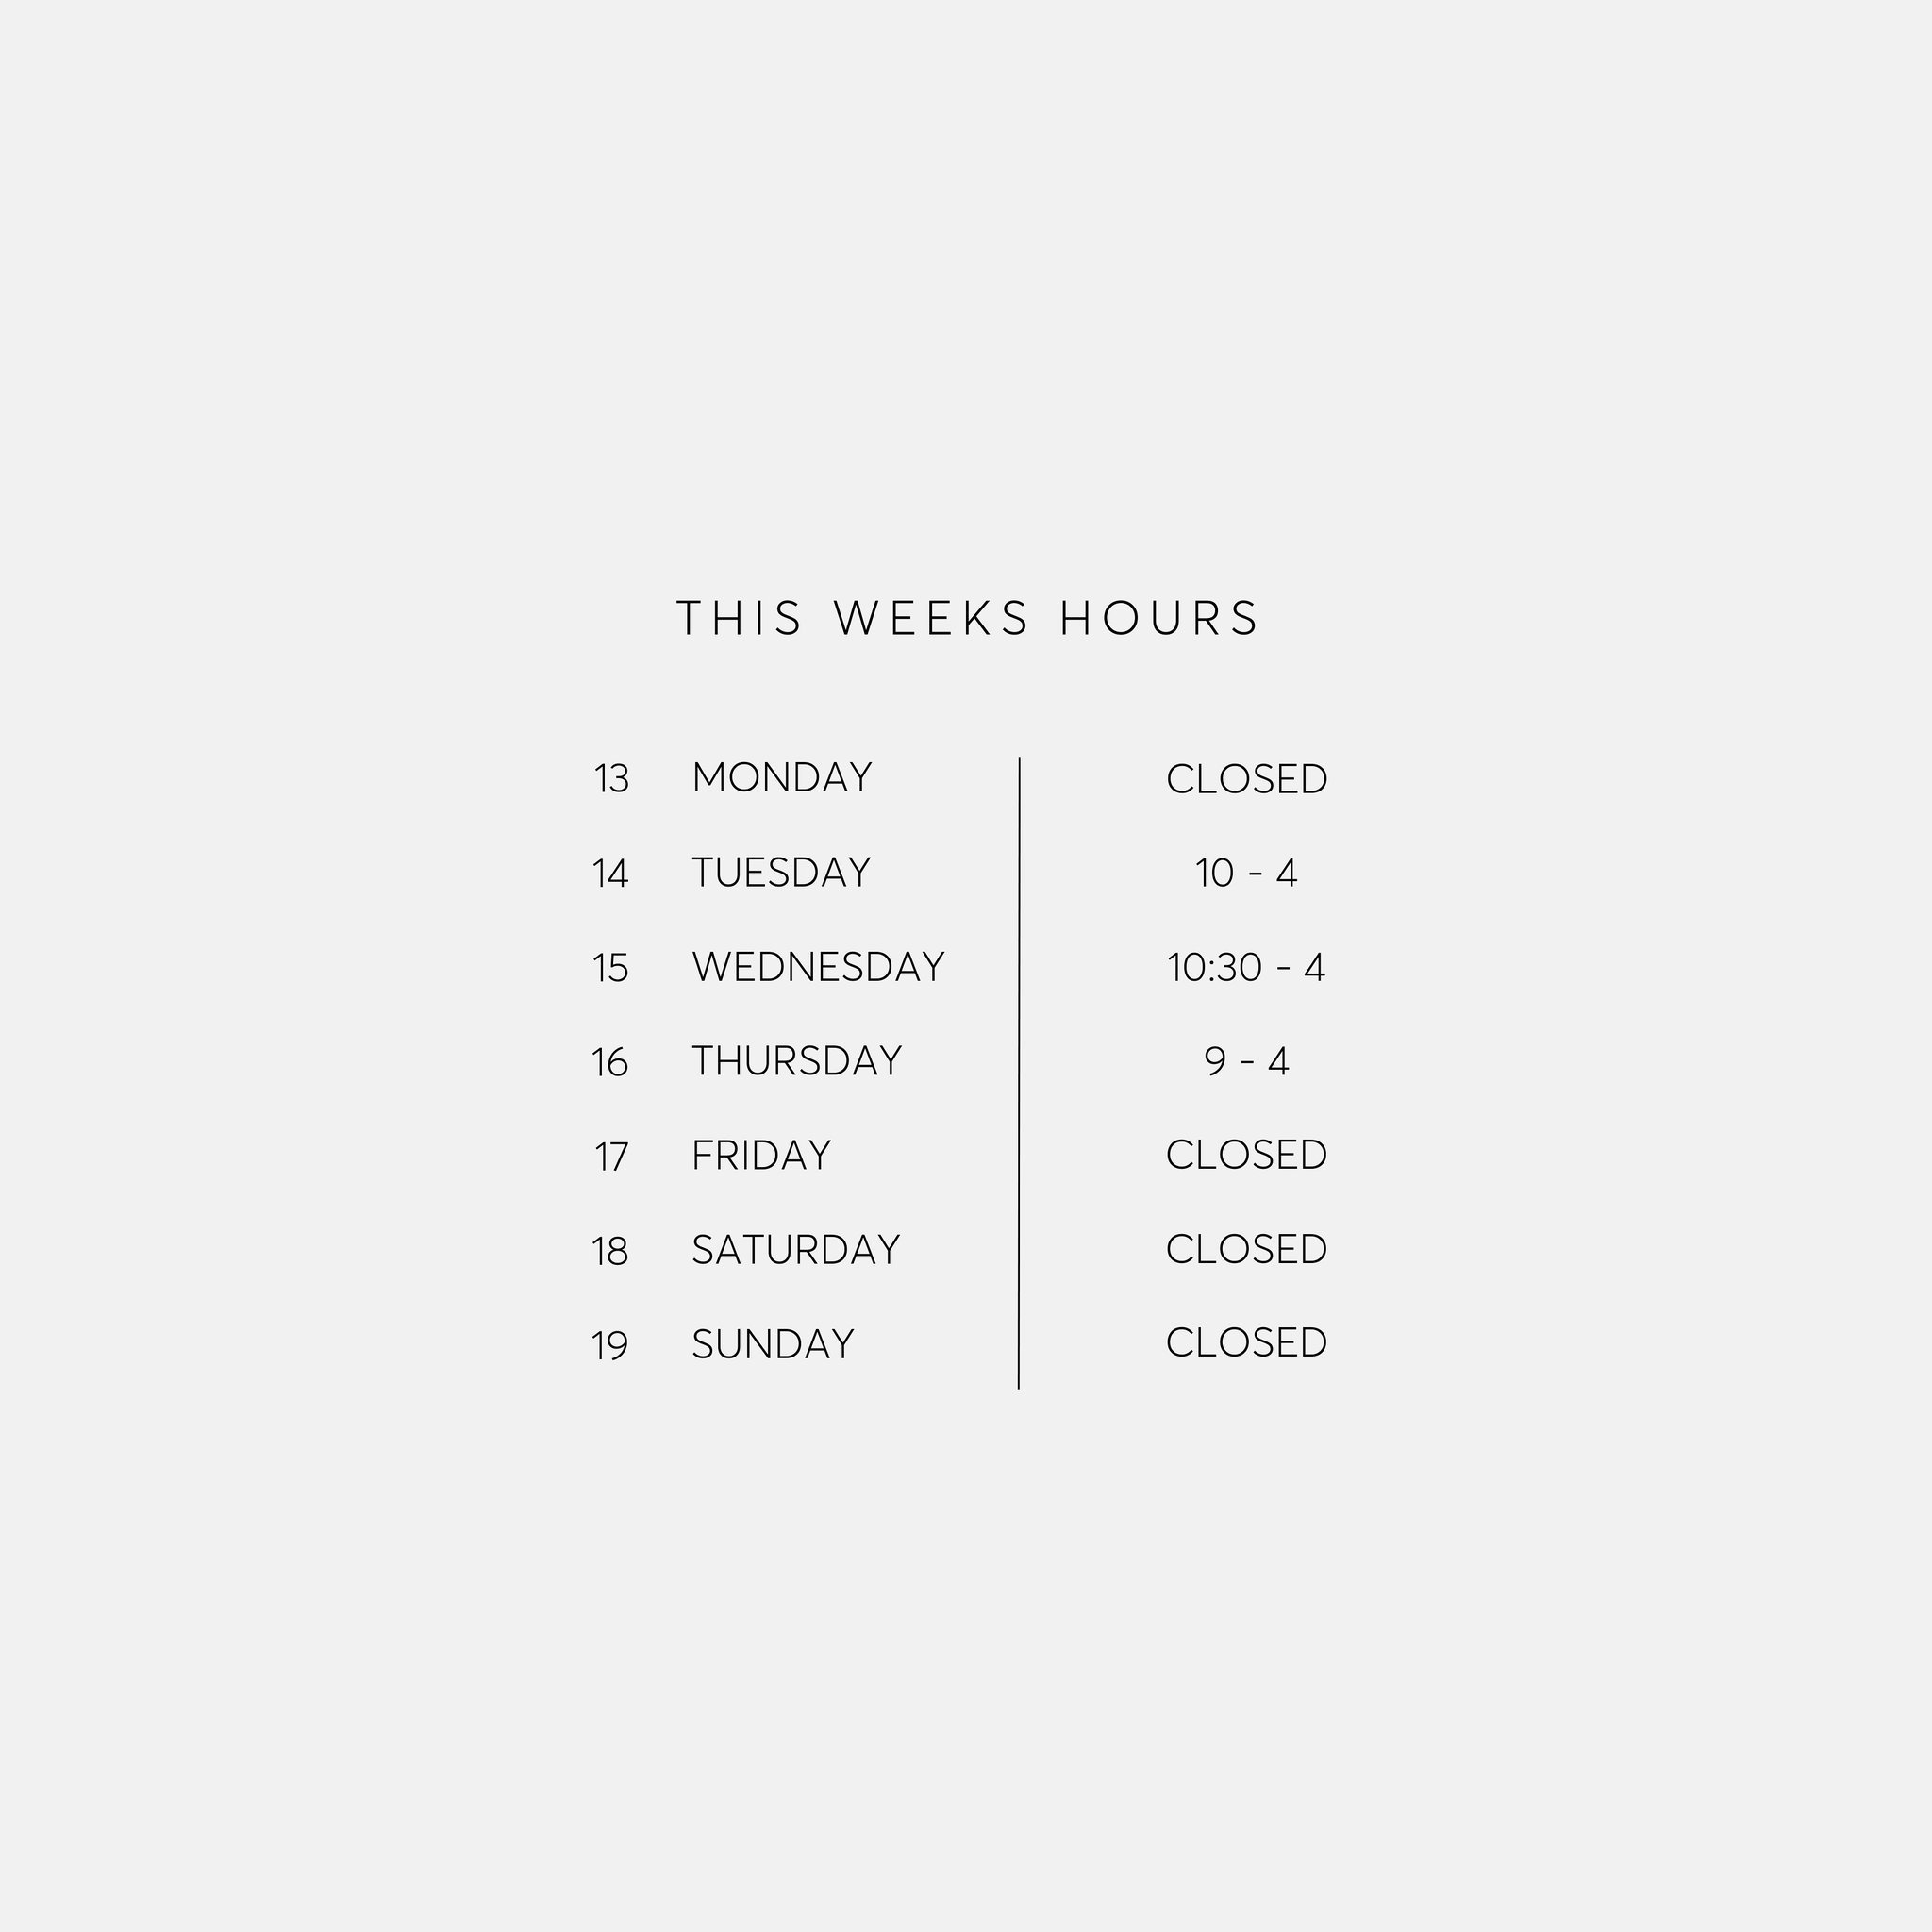 this weeks hours&mdash;
weekly hours vary. by appointment only. walk ins welcome, however there may be a short wait. 

visit www.waveshydrationlounge.com for appointment availability&mdash; link is in bio!

please text 209-222-8996 for any questions!